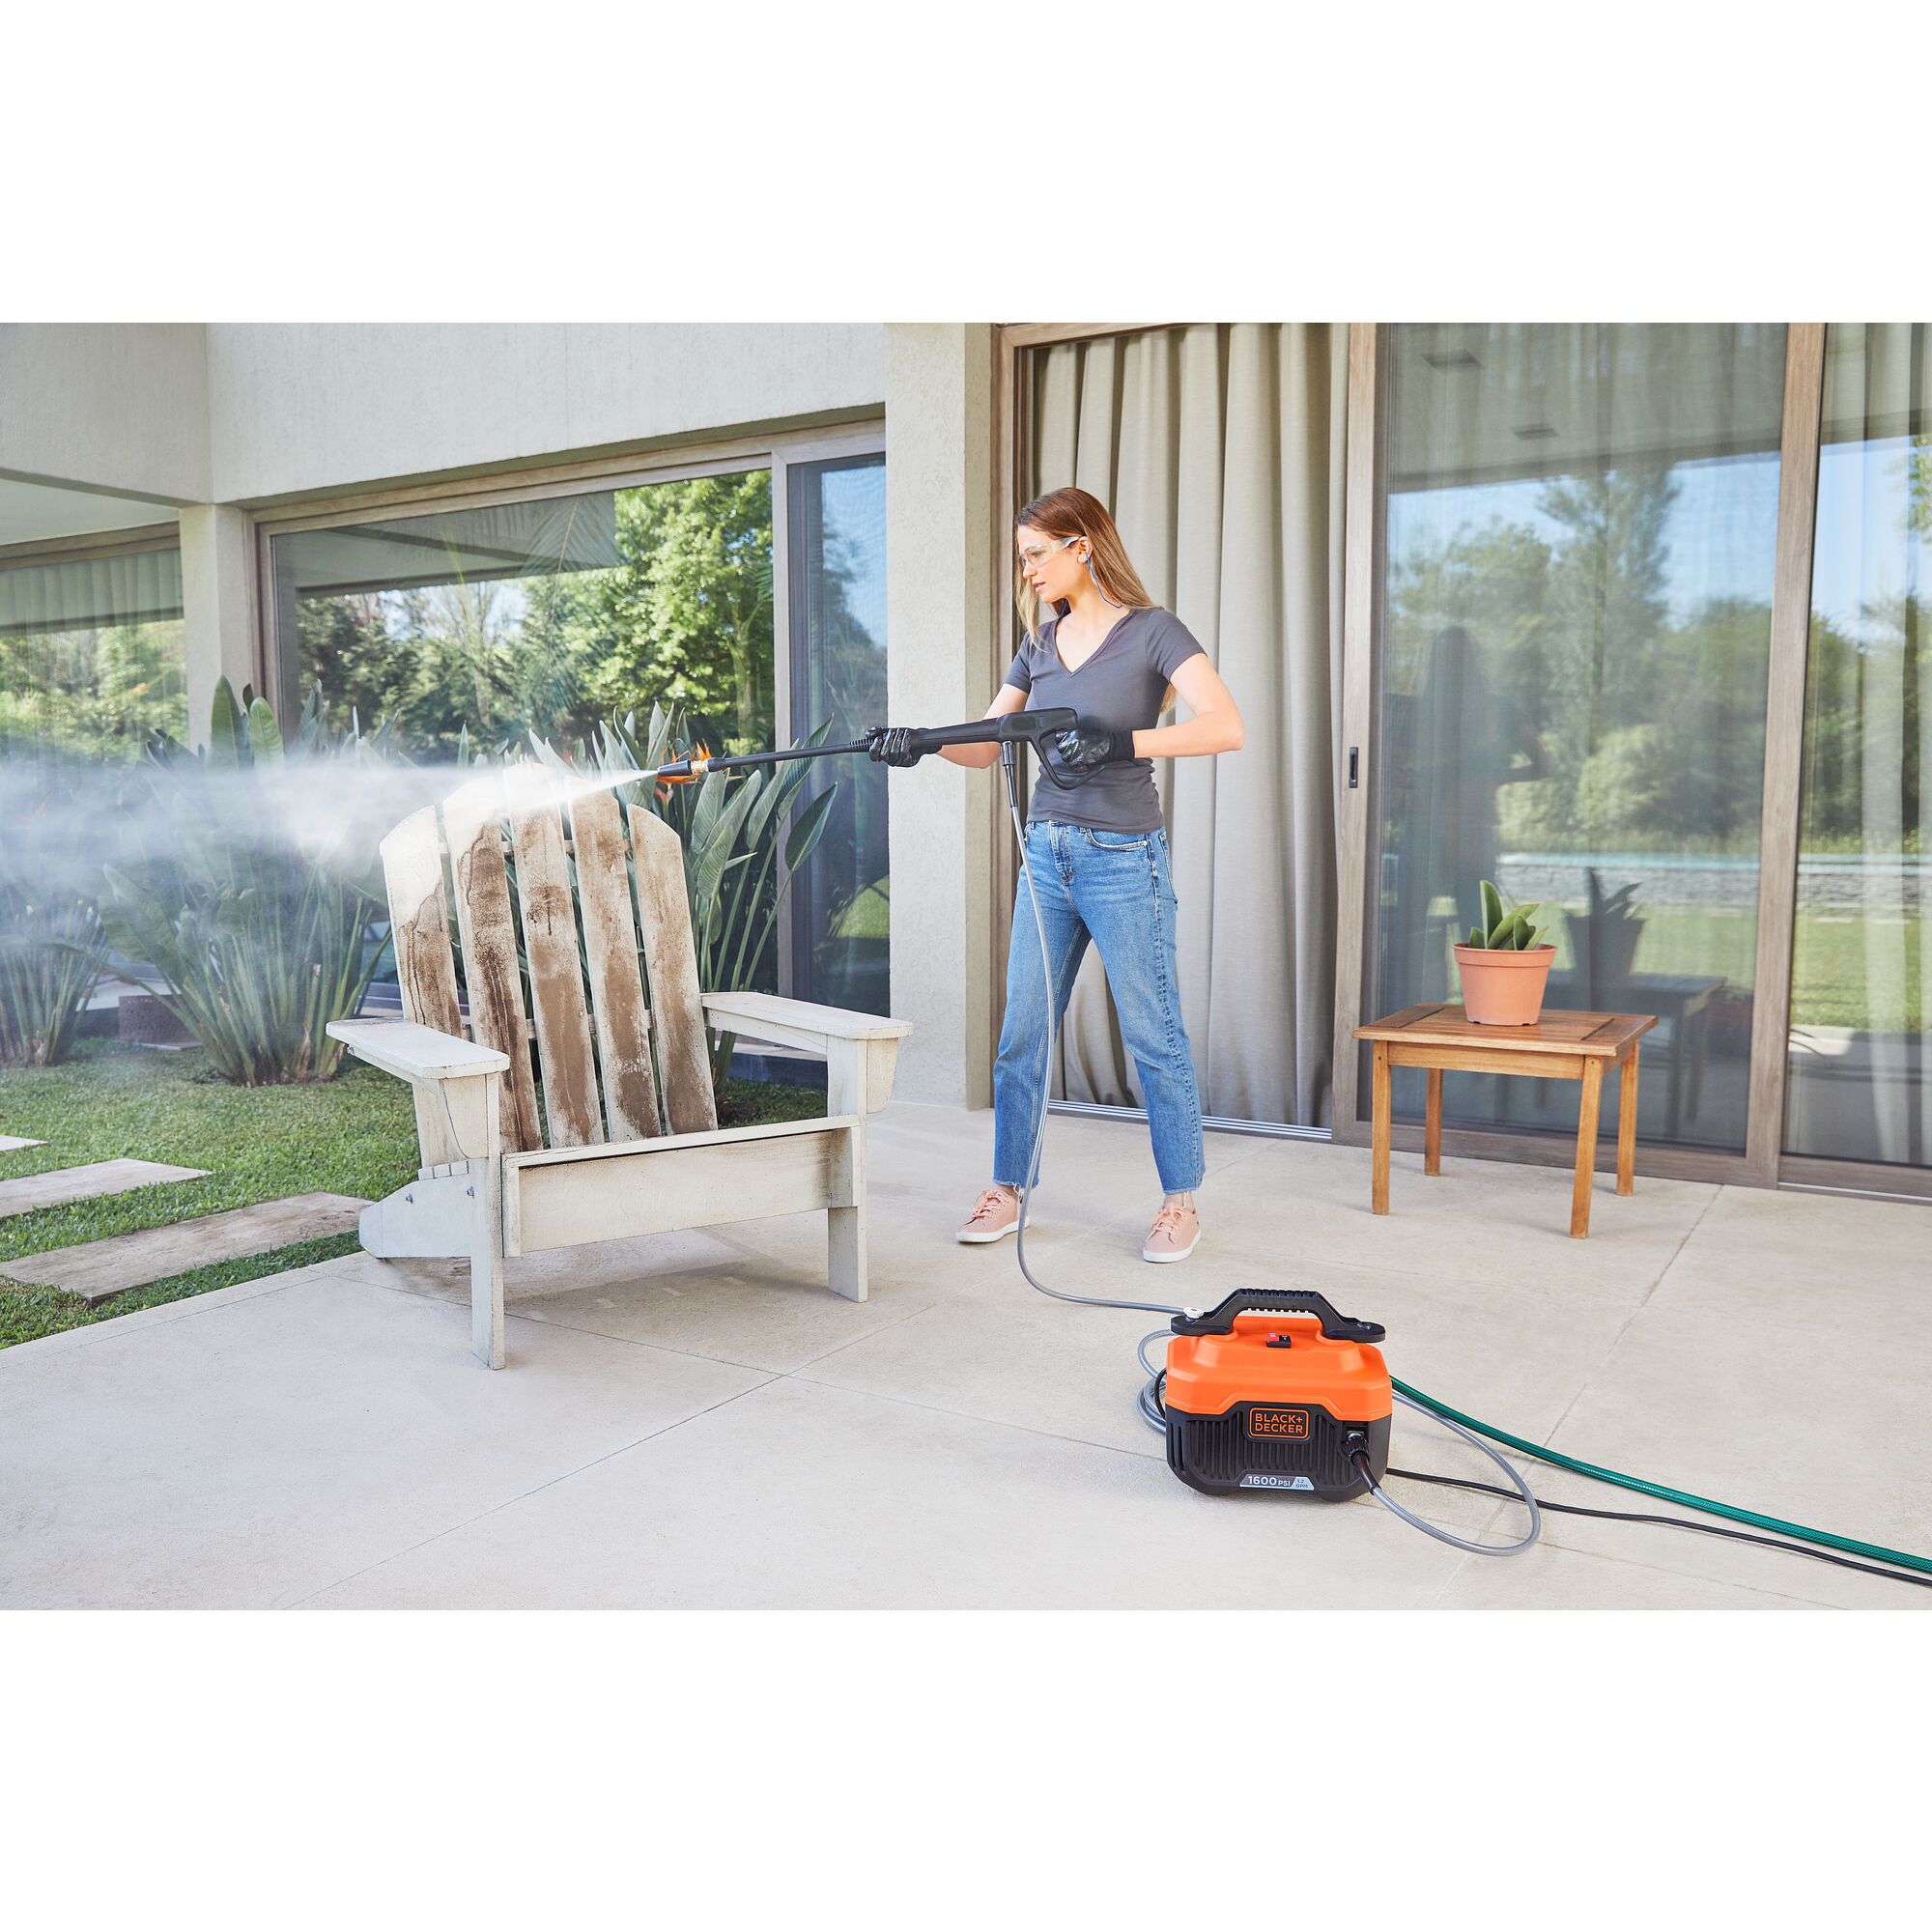 Woman using BLACK+DECKER 1,600 MAX psi* pressure washer with turbo nozzle to clean patio chair on a patio outside a house